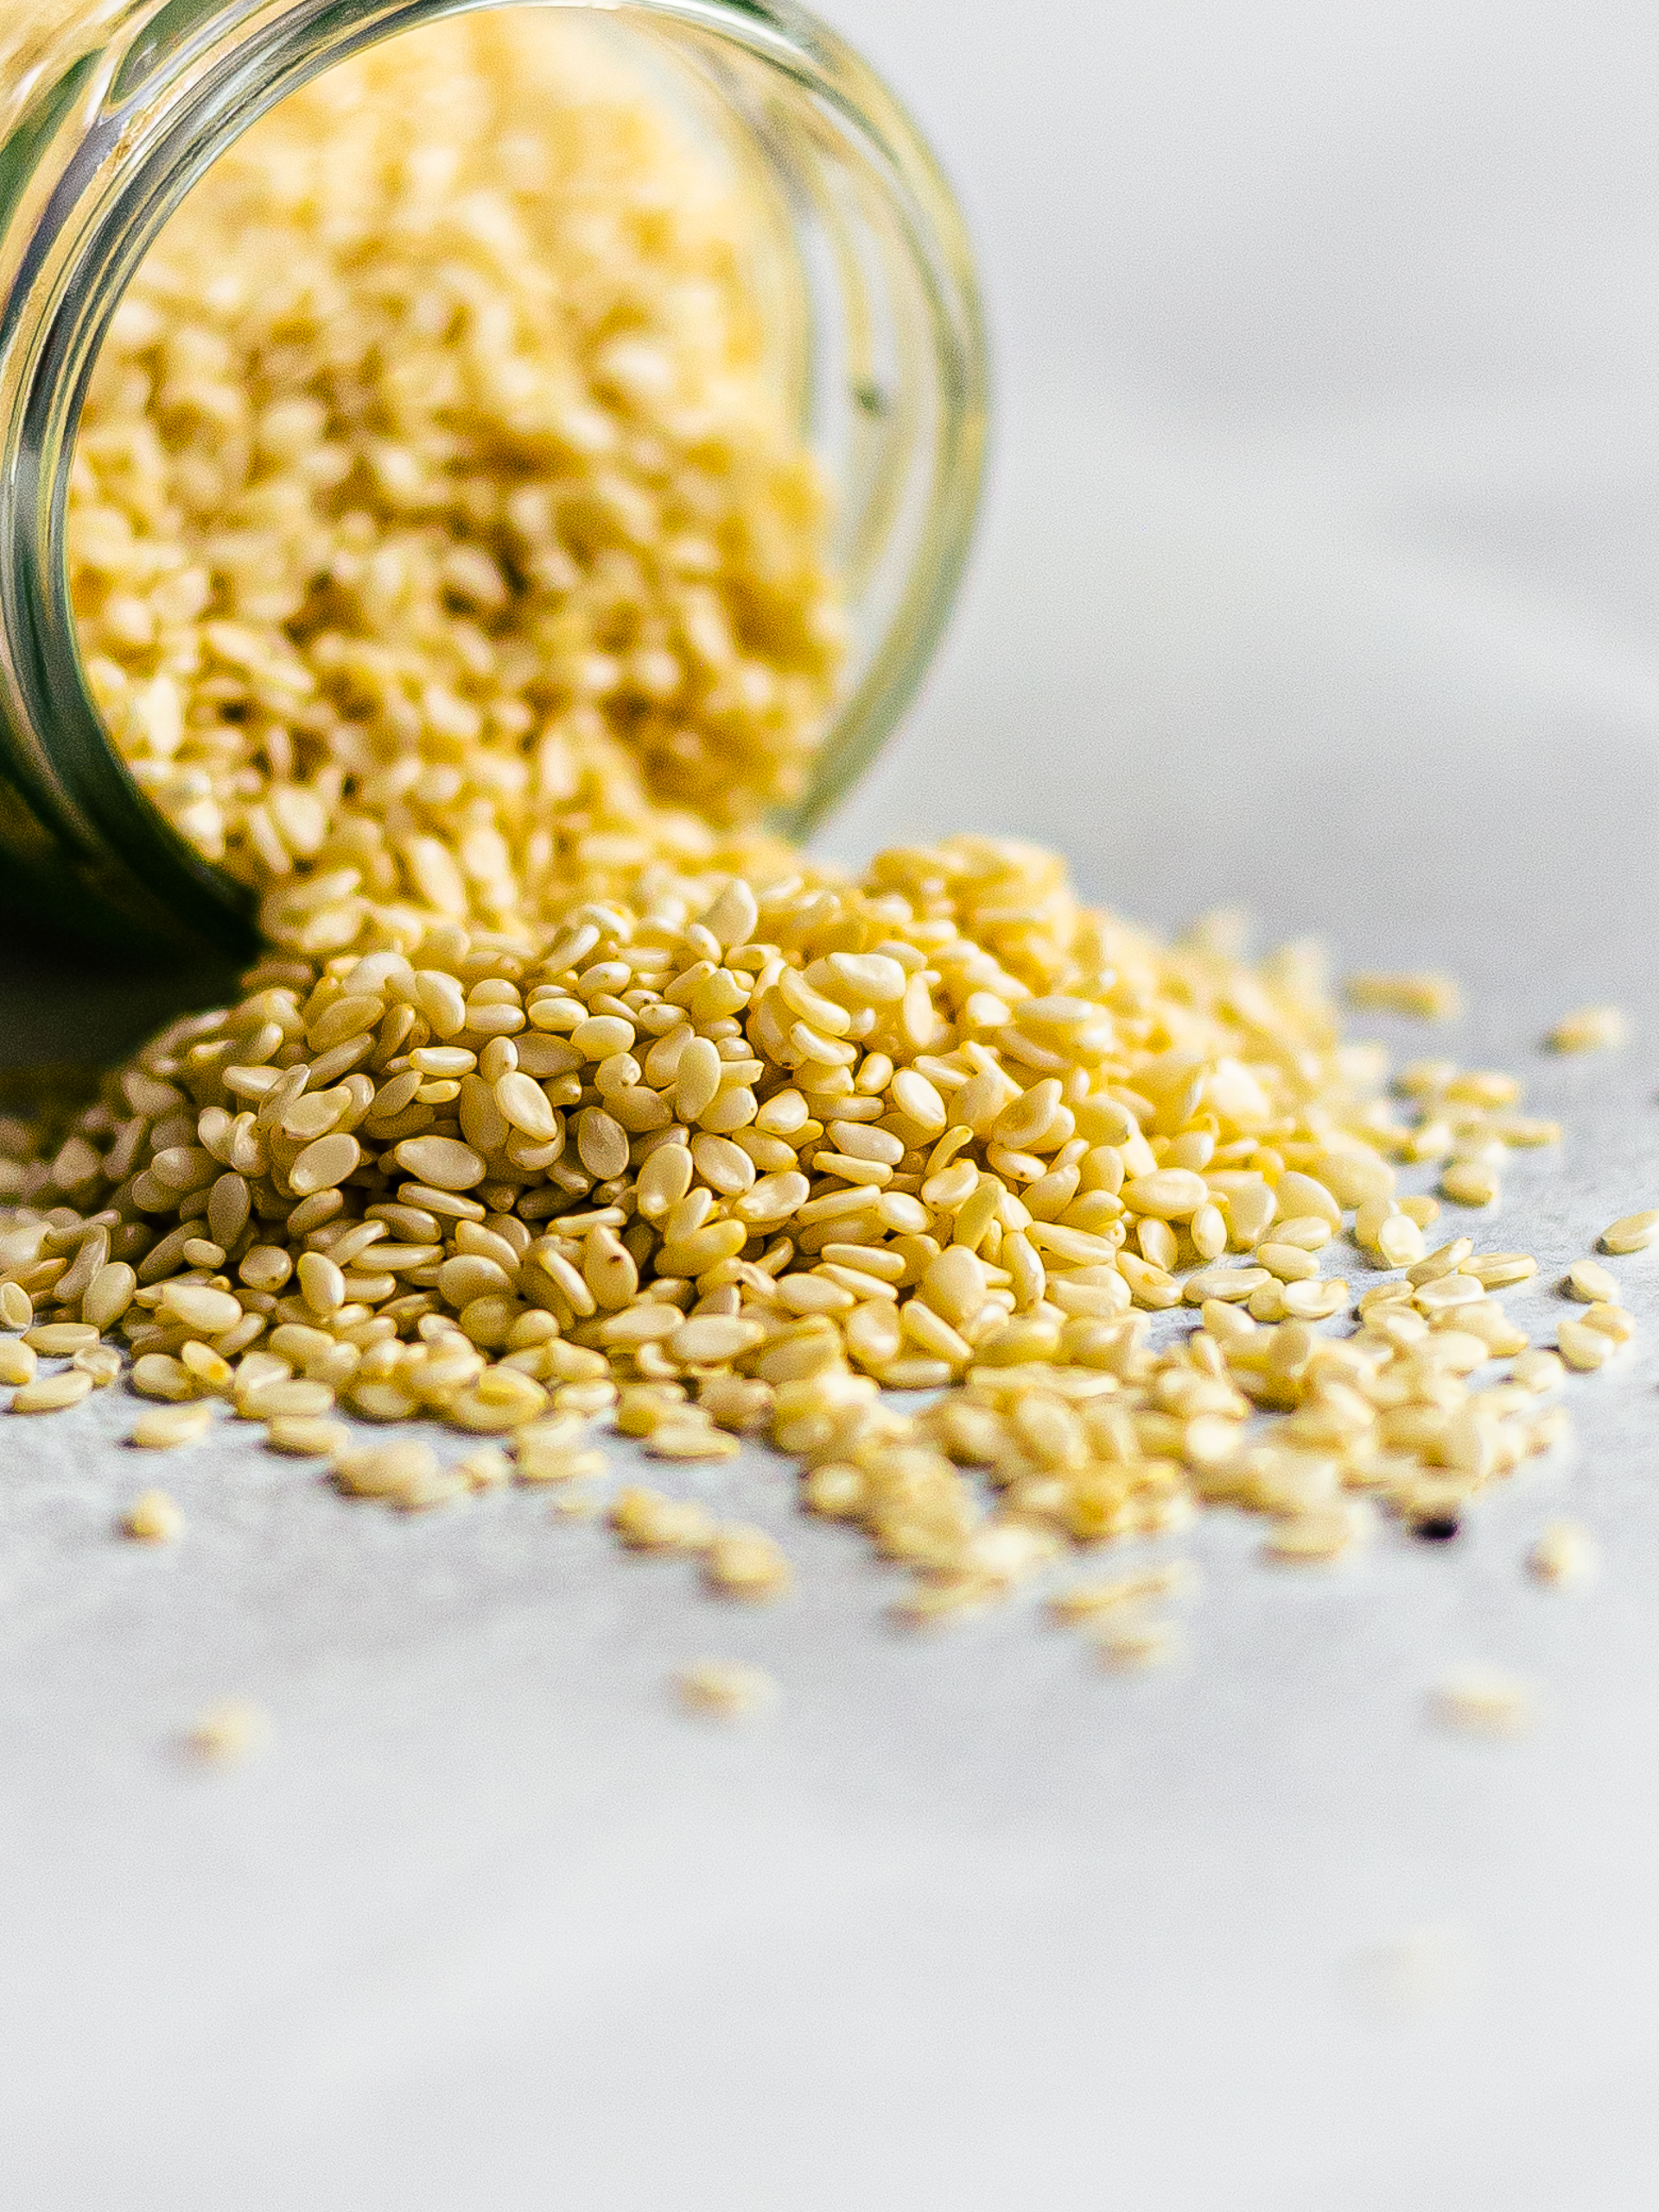 Don't Miss to Add Hemp Seeds to Your Healthy Diet